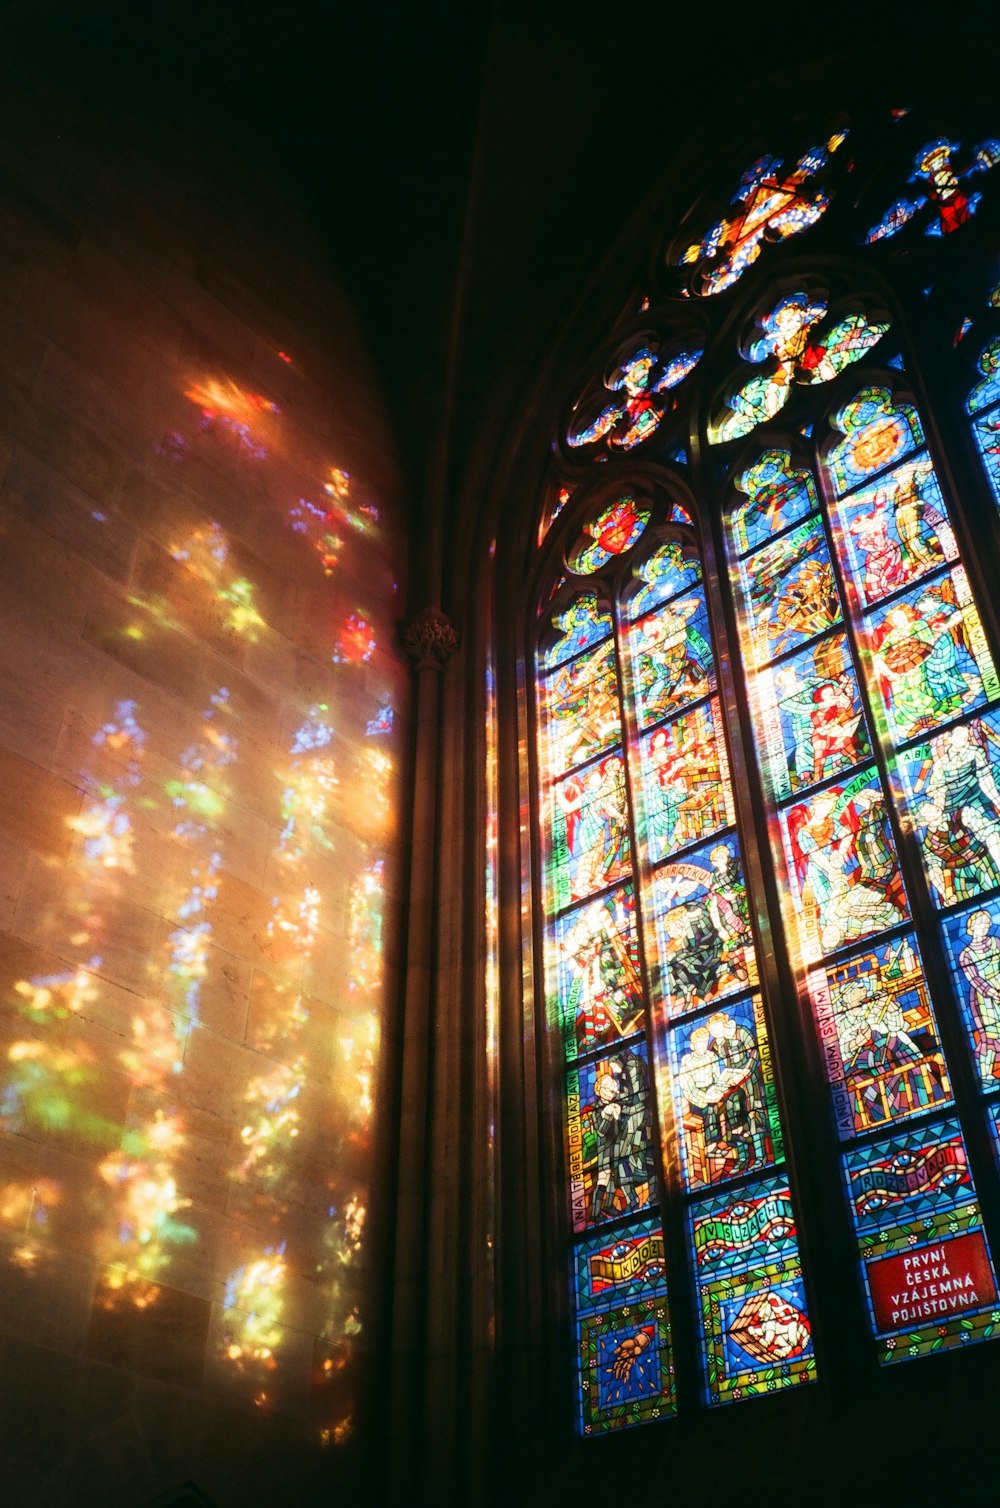 750+ Stained Glass Pictures | Download Free Images on Unsplash